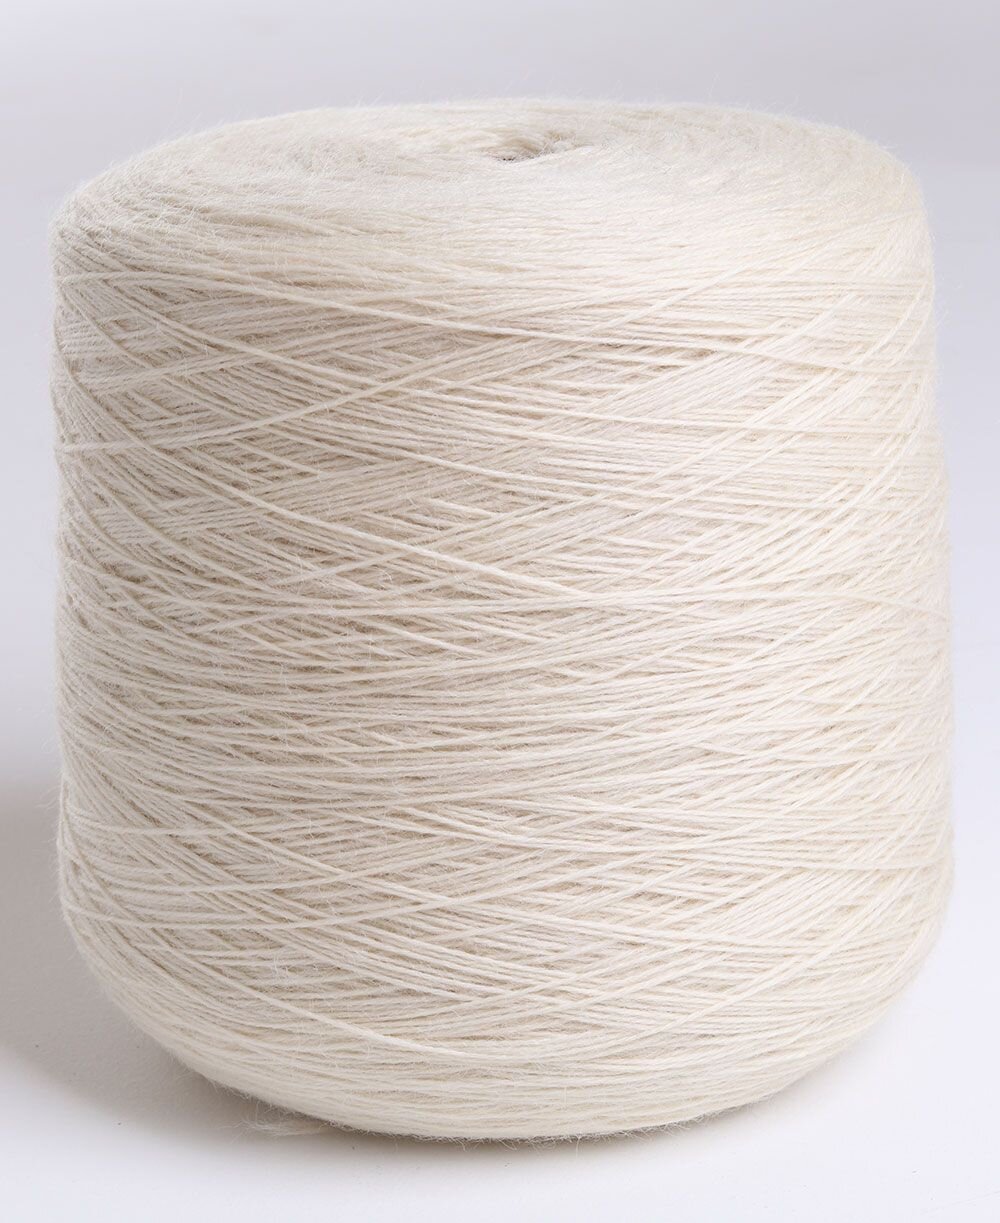 Misc Baby 3 ply Yarn For Sale